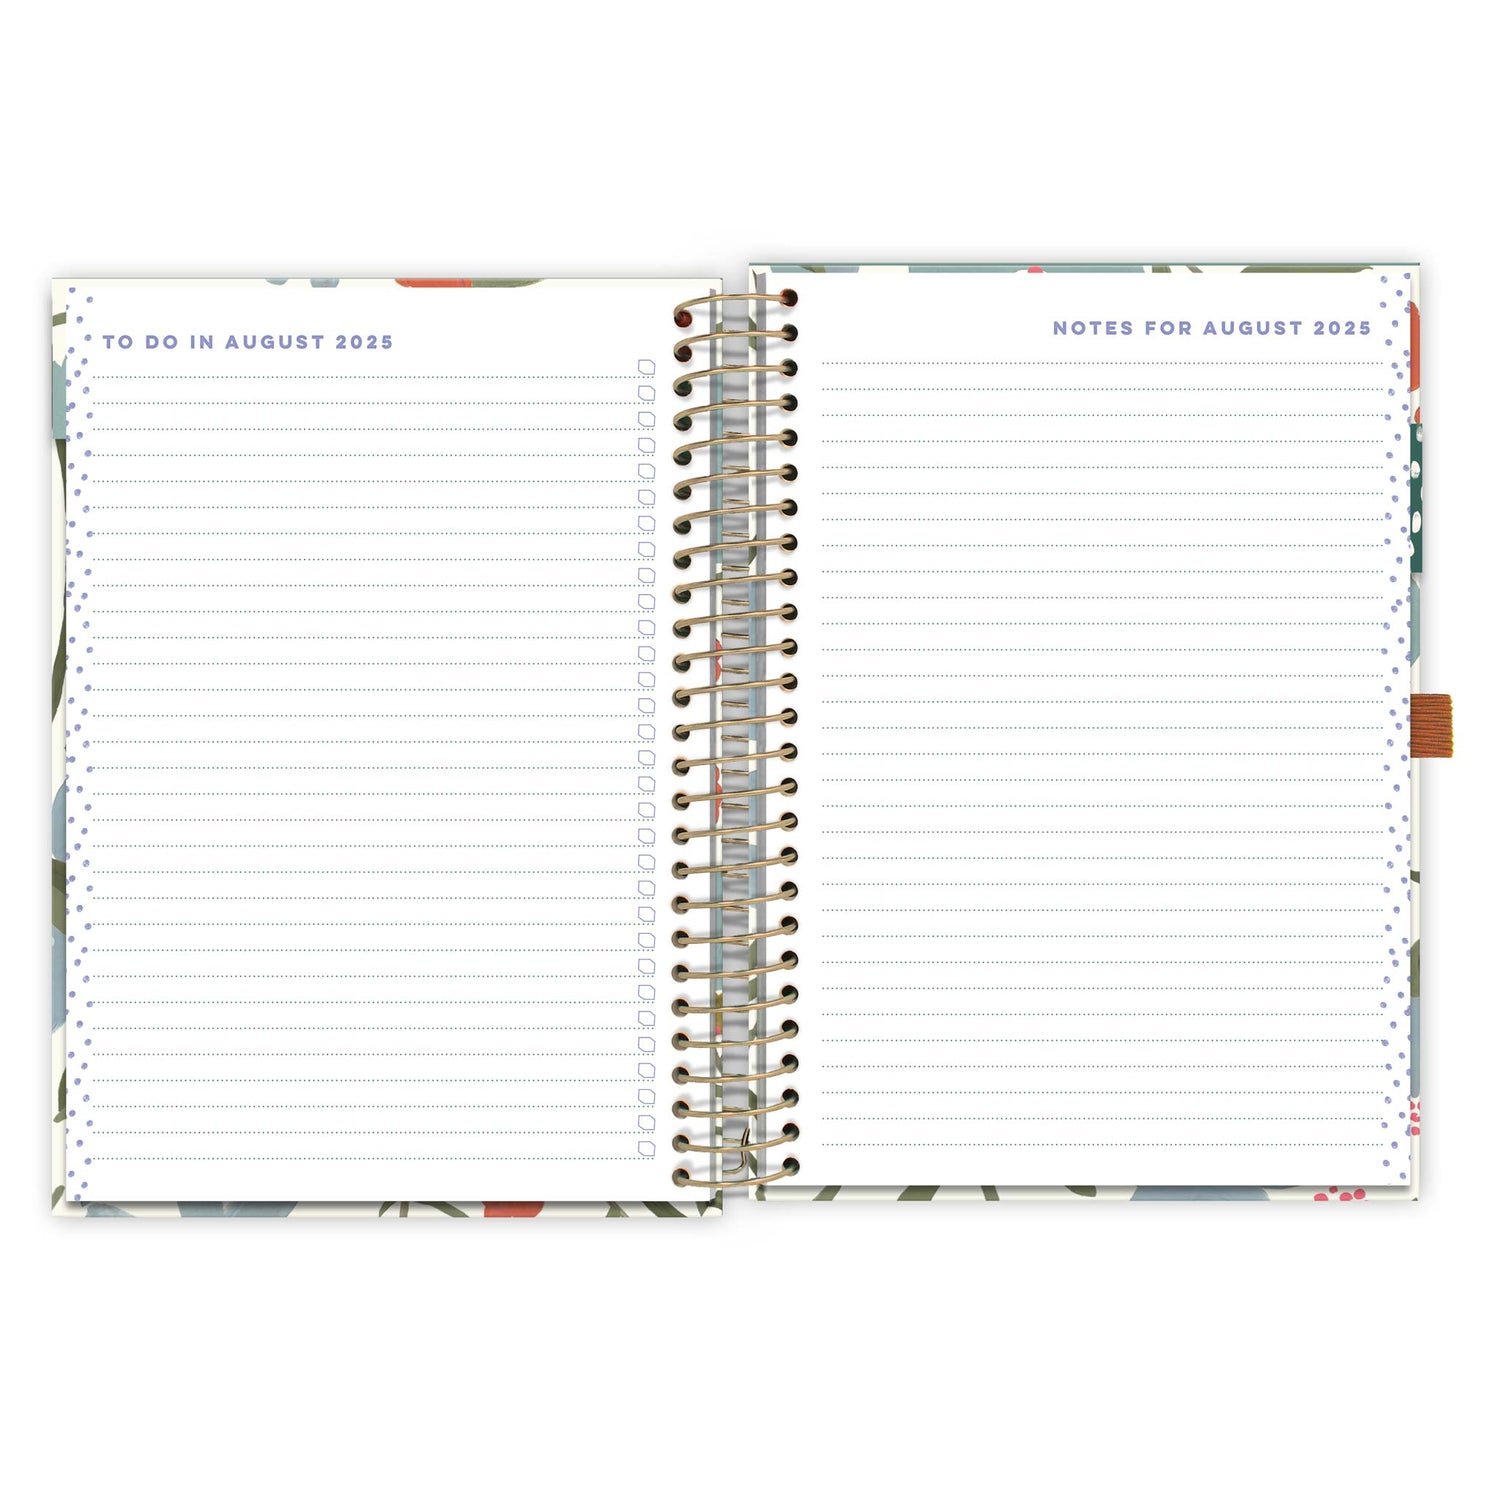 An open diary planner page with a to do in August 2025 page and notes for August 2025 page